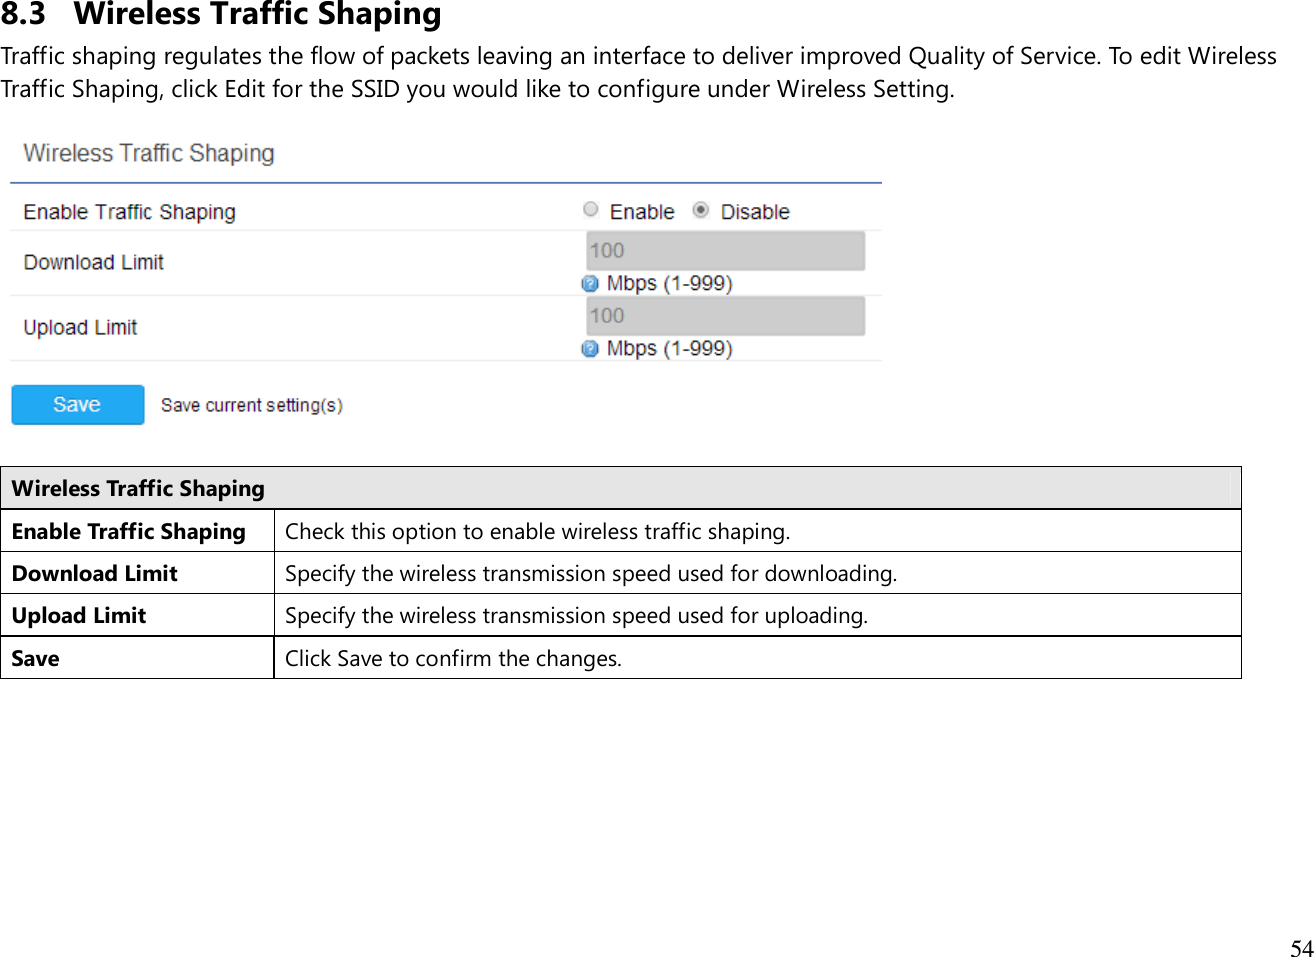  54  8.3 Wireless Traffic Shaping Traffic shaping regulates the flow of packets leaving an interface to deliver improved Quality of Service. To edit Wireless Traffic Shaping, click Edit for the SSID you would like to configure under Wireless Setting.    Wireless Traffic Shaping Enable Traffic Shaping Check this option to enable wireless traffic shaping. Download Limit Specify the wireless transmission speed used for downloading. Upload Limit Specify the wireless transmission speed used for uploading. Save Click Save to confirm the changes.   